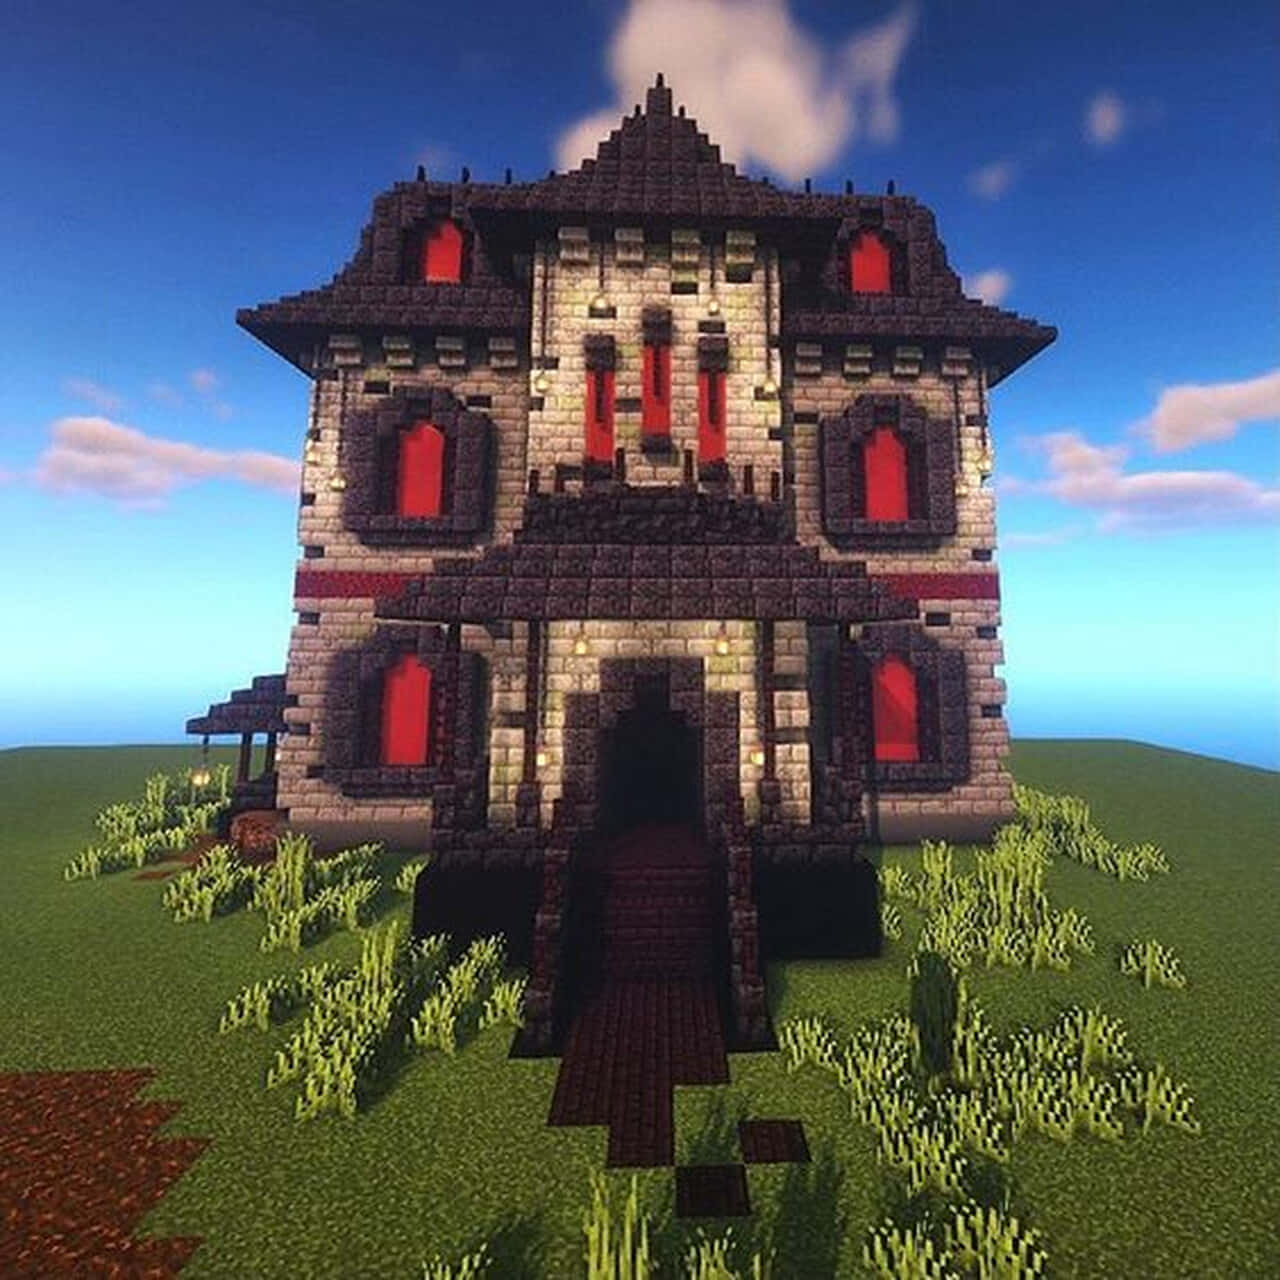 A Minecraft House With A Red Roof And Red Windows